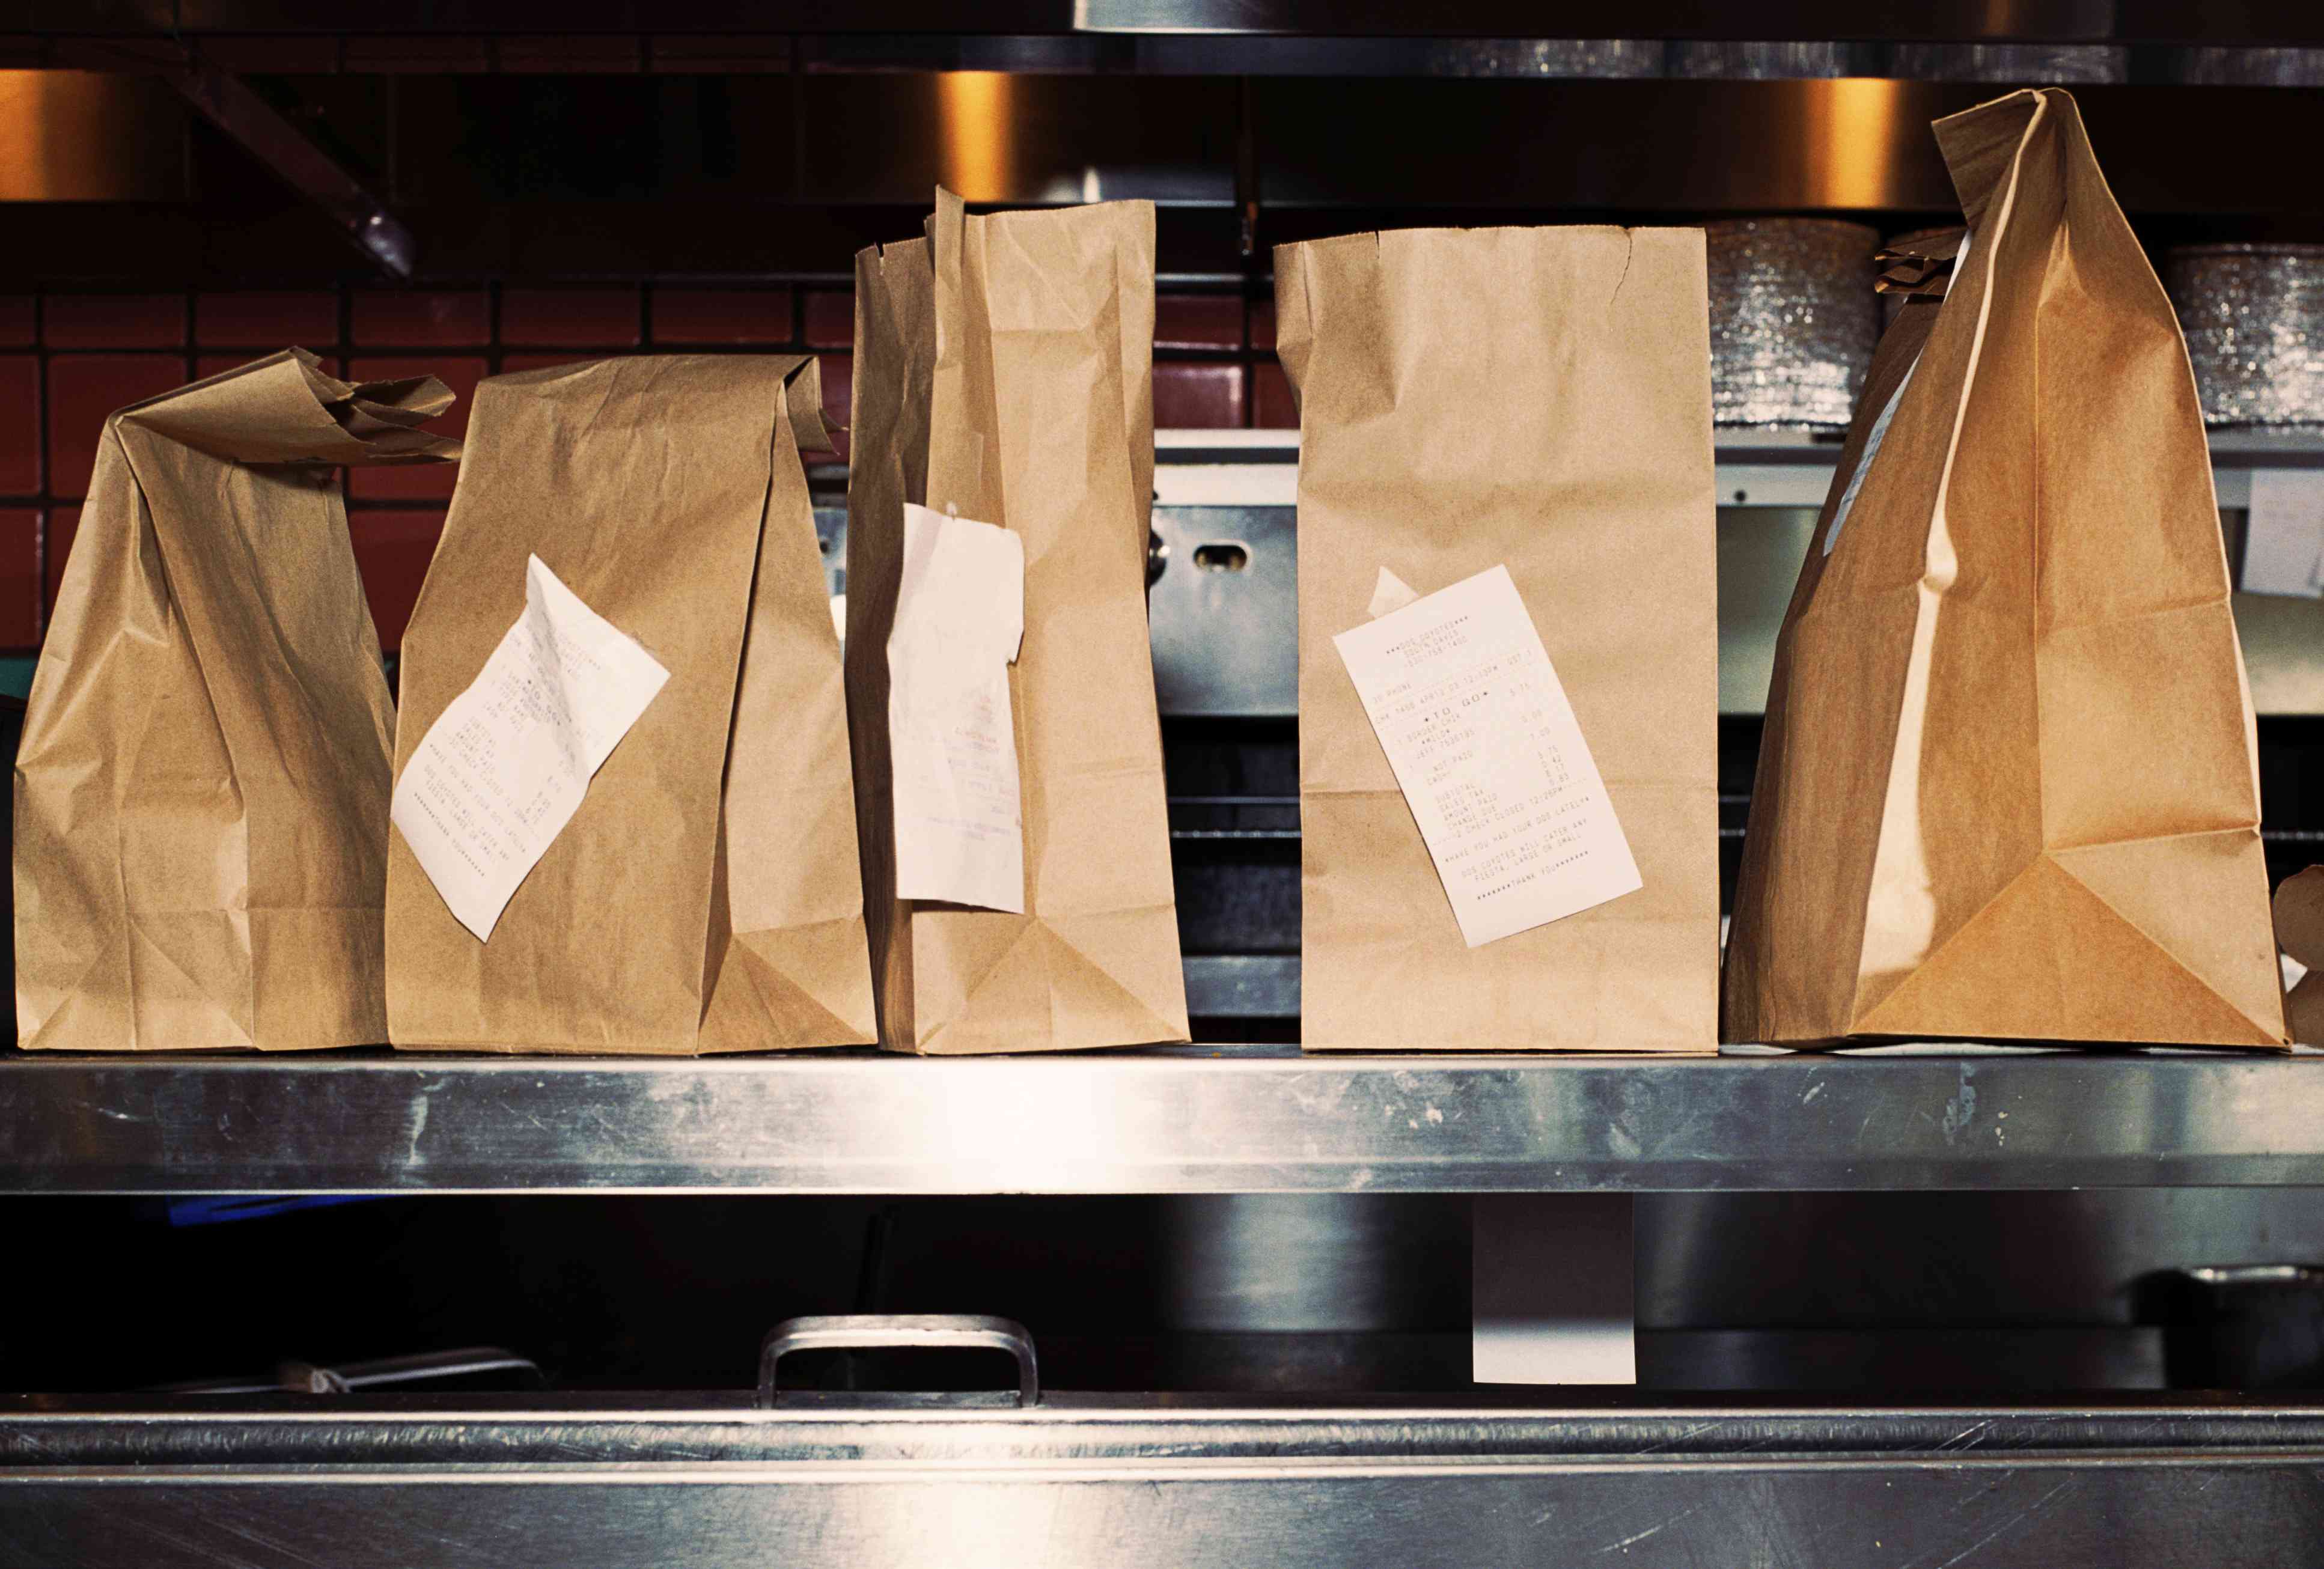 restaurants temporarily pausing takeout and delivery orders is actually great customer service